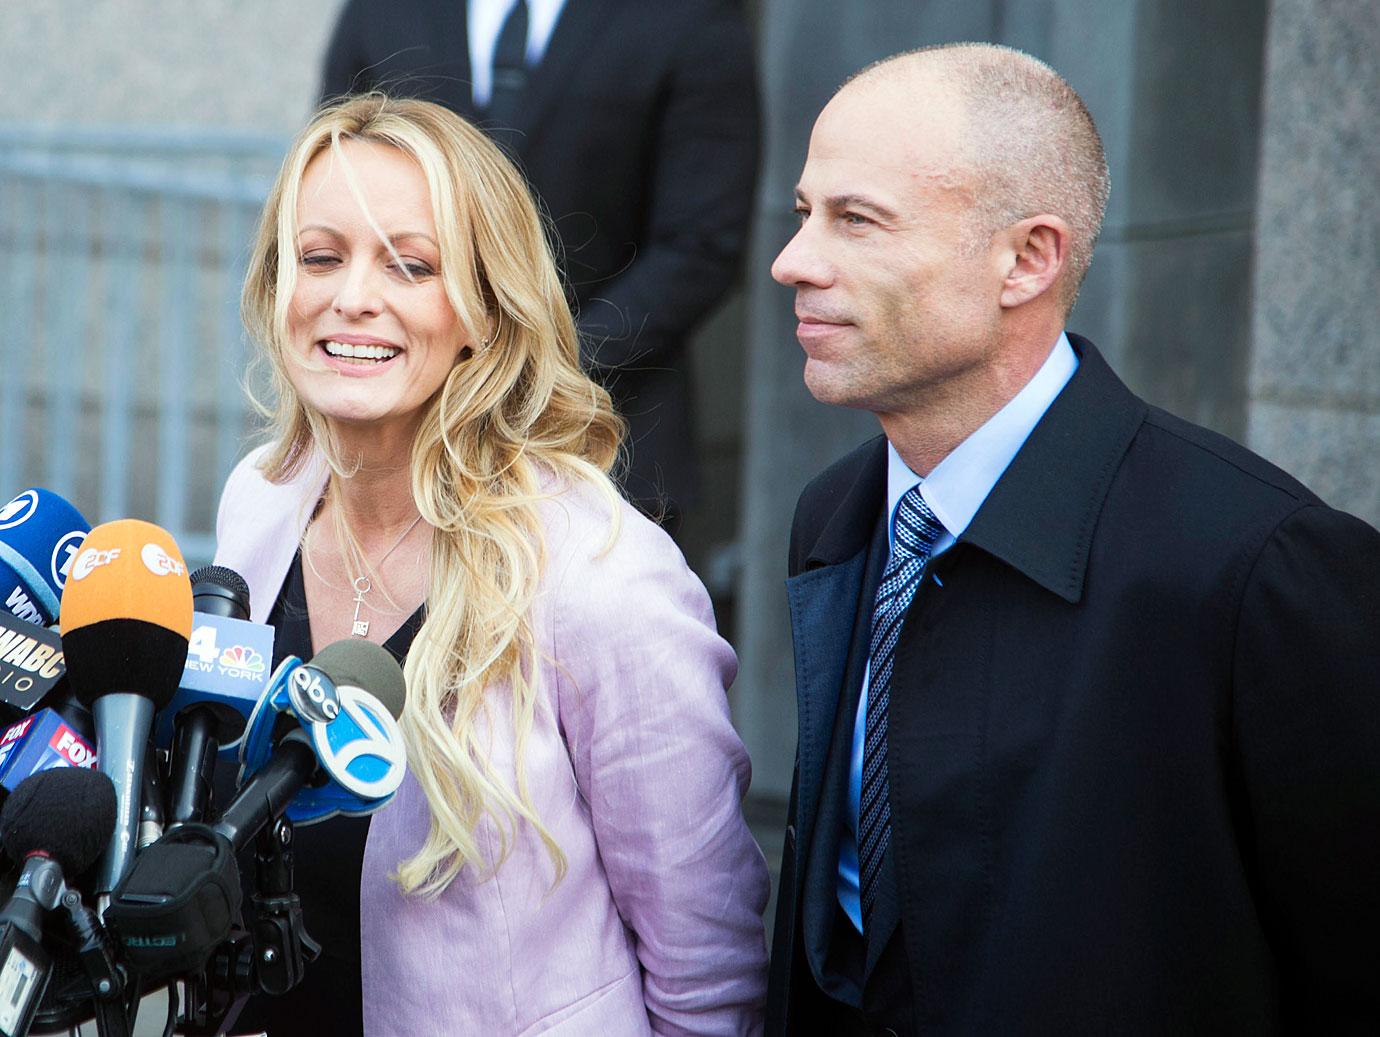 Michael Avenatti Cries In Court Over 2.5 Year Prison Sentence For  Attempting To Extort Nike